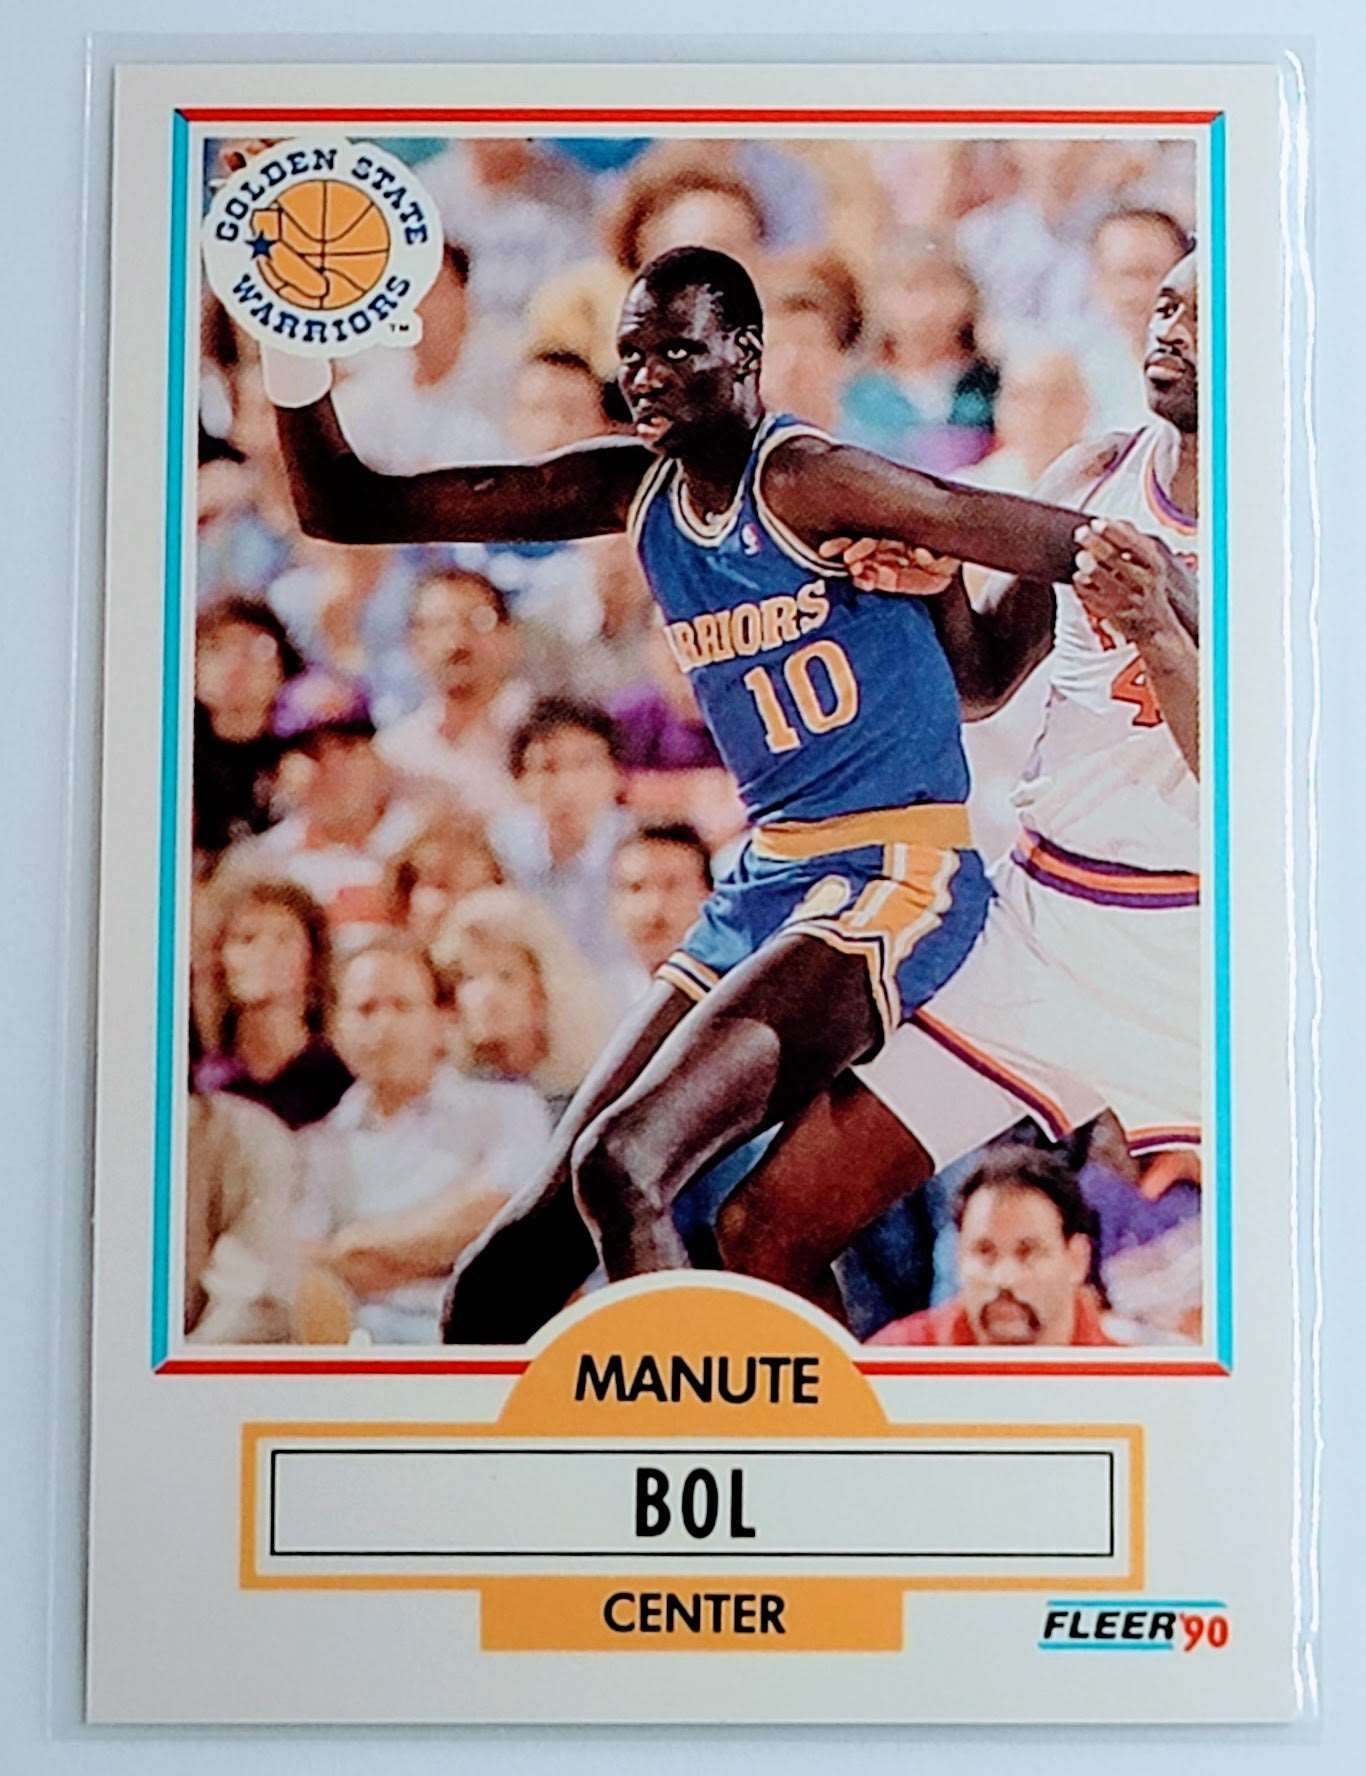 1990 Fleer Manute Bol   Basketball Card  TH13C simple Xclusive Collectibles   